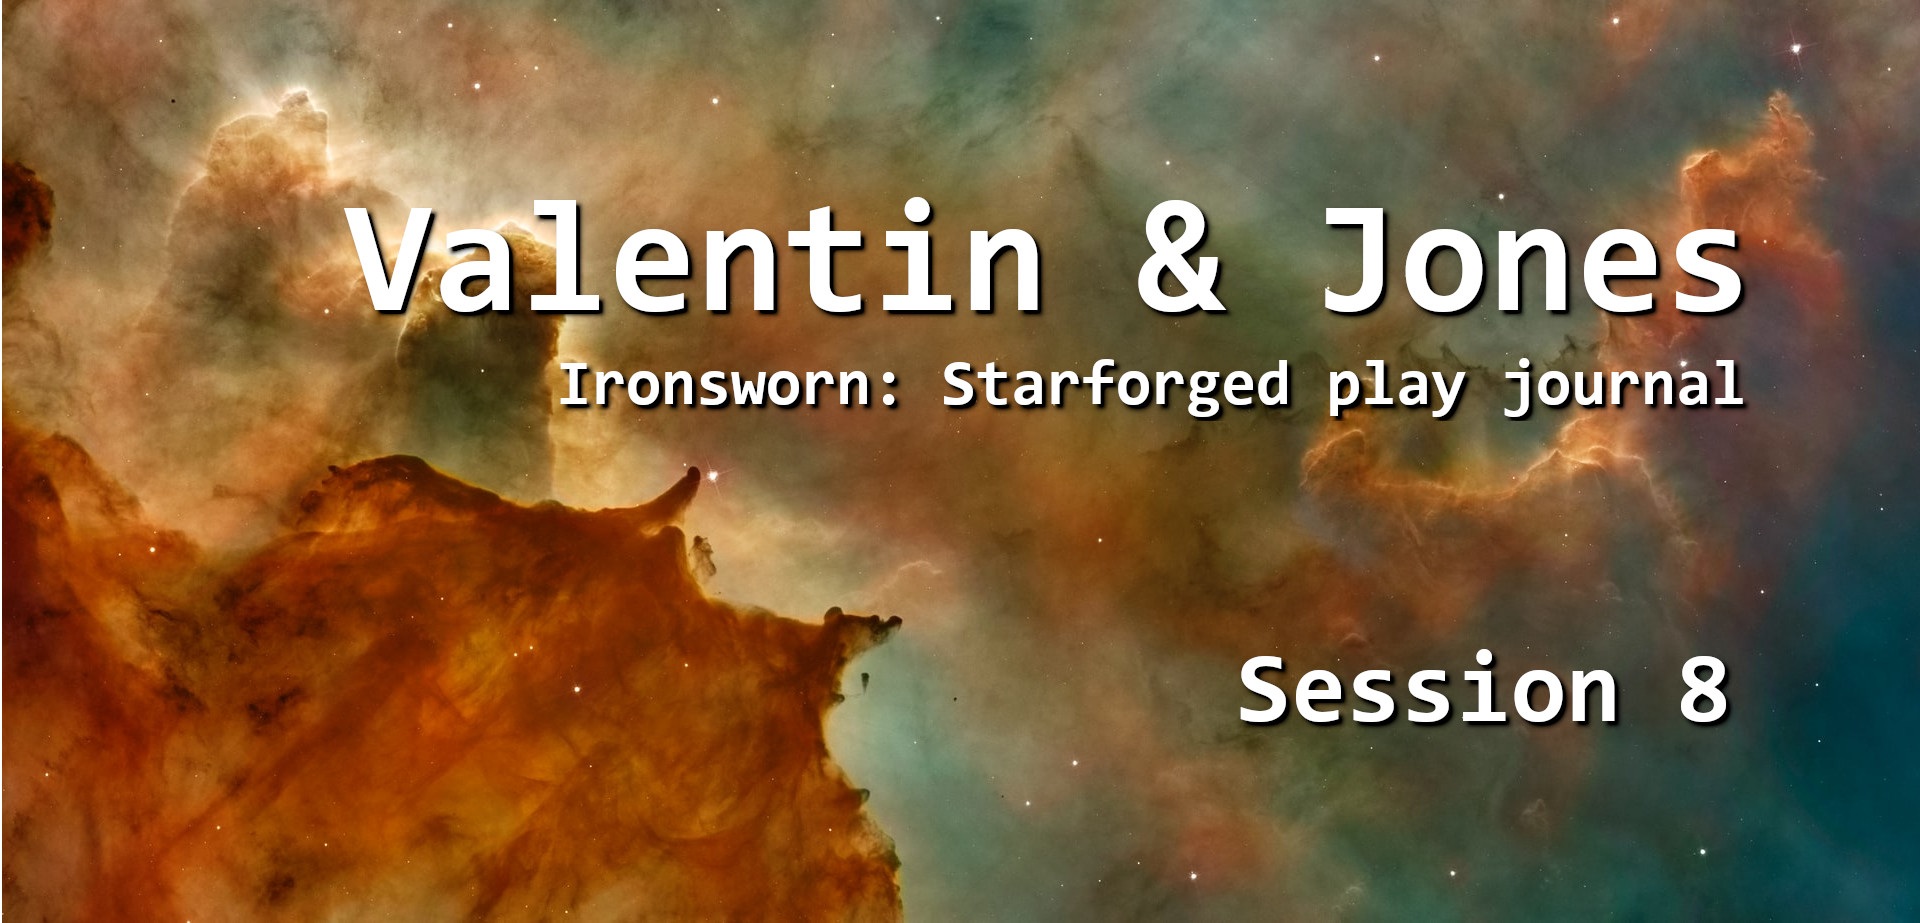 Valentin & Jones, Session 8, Starforged actual play journal